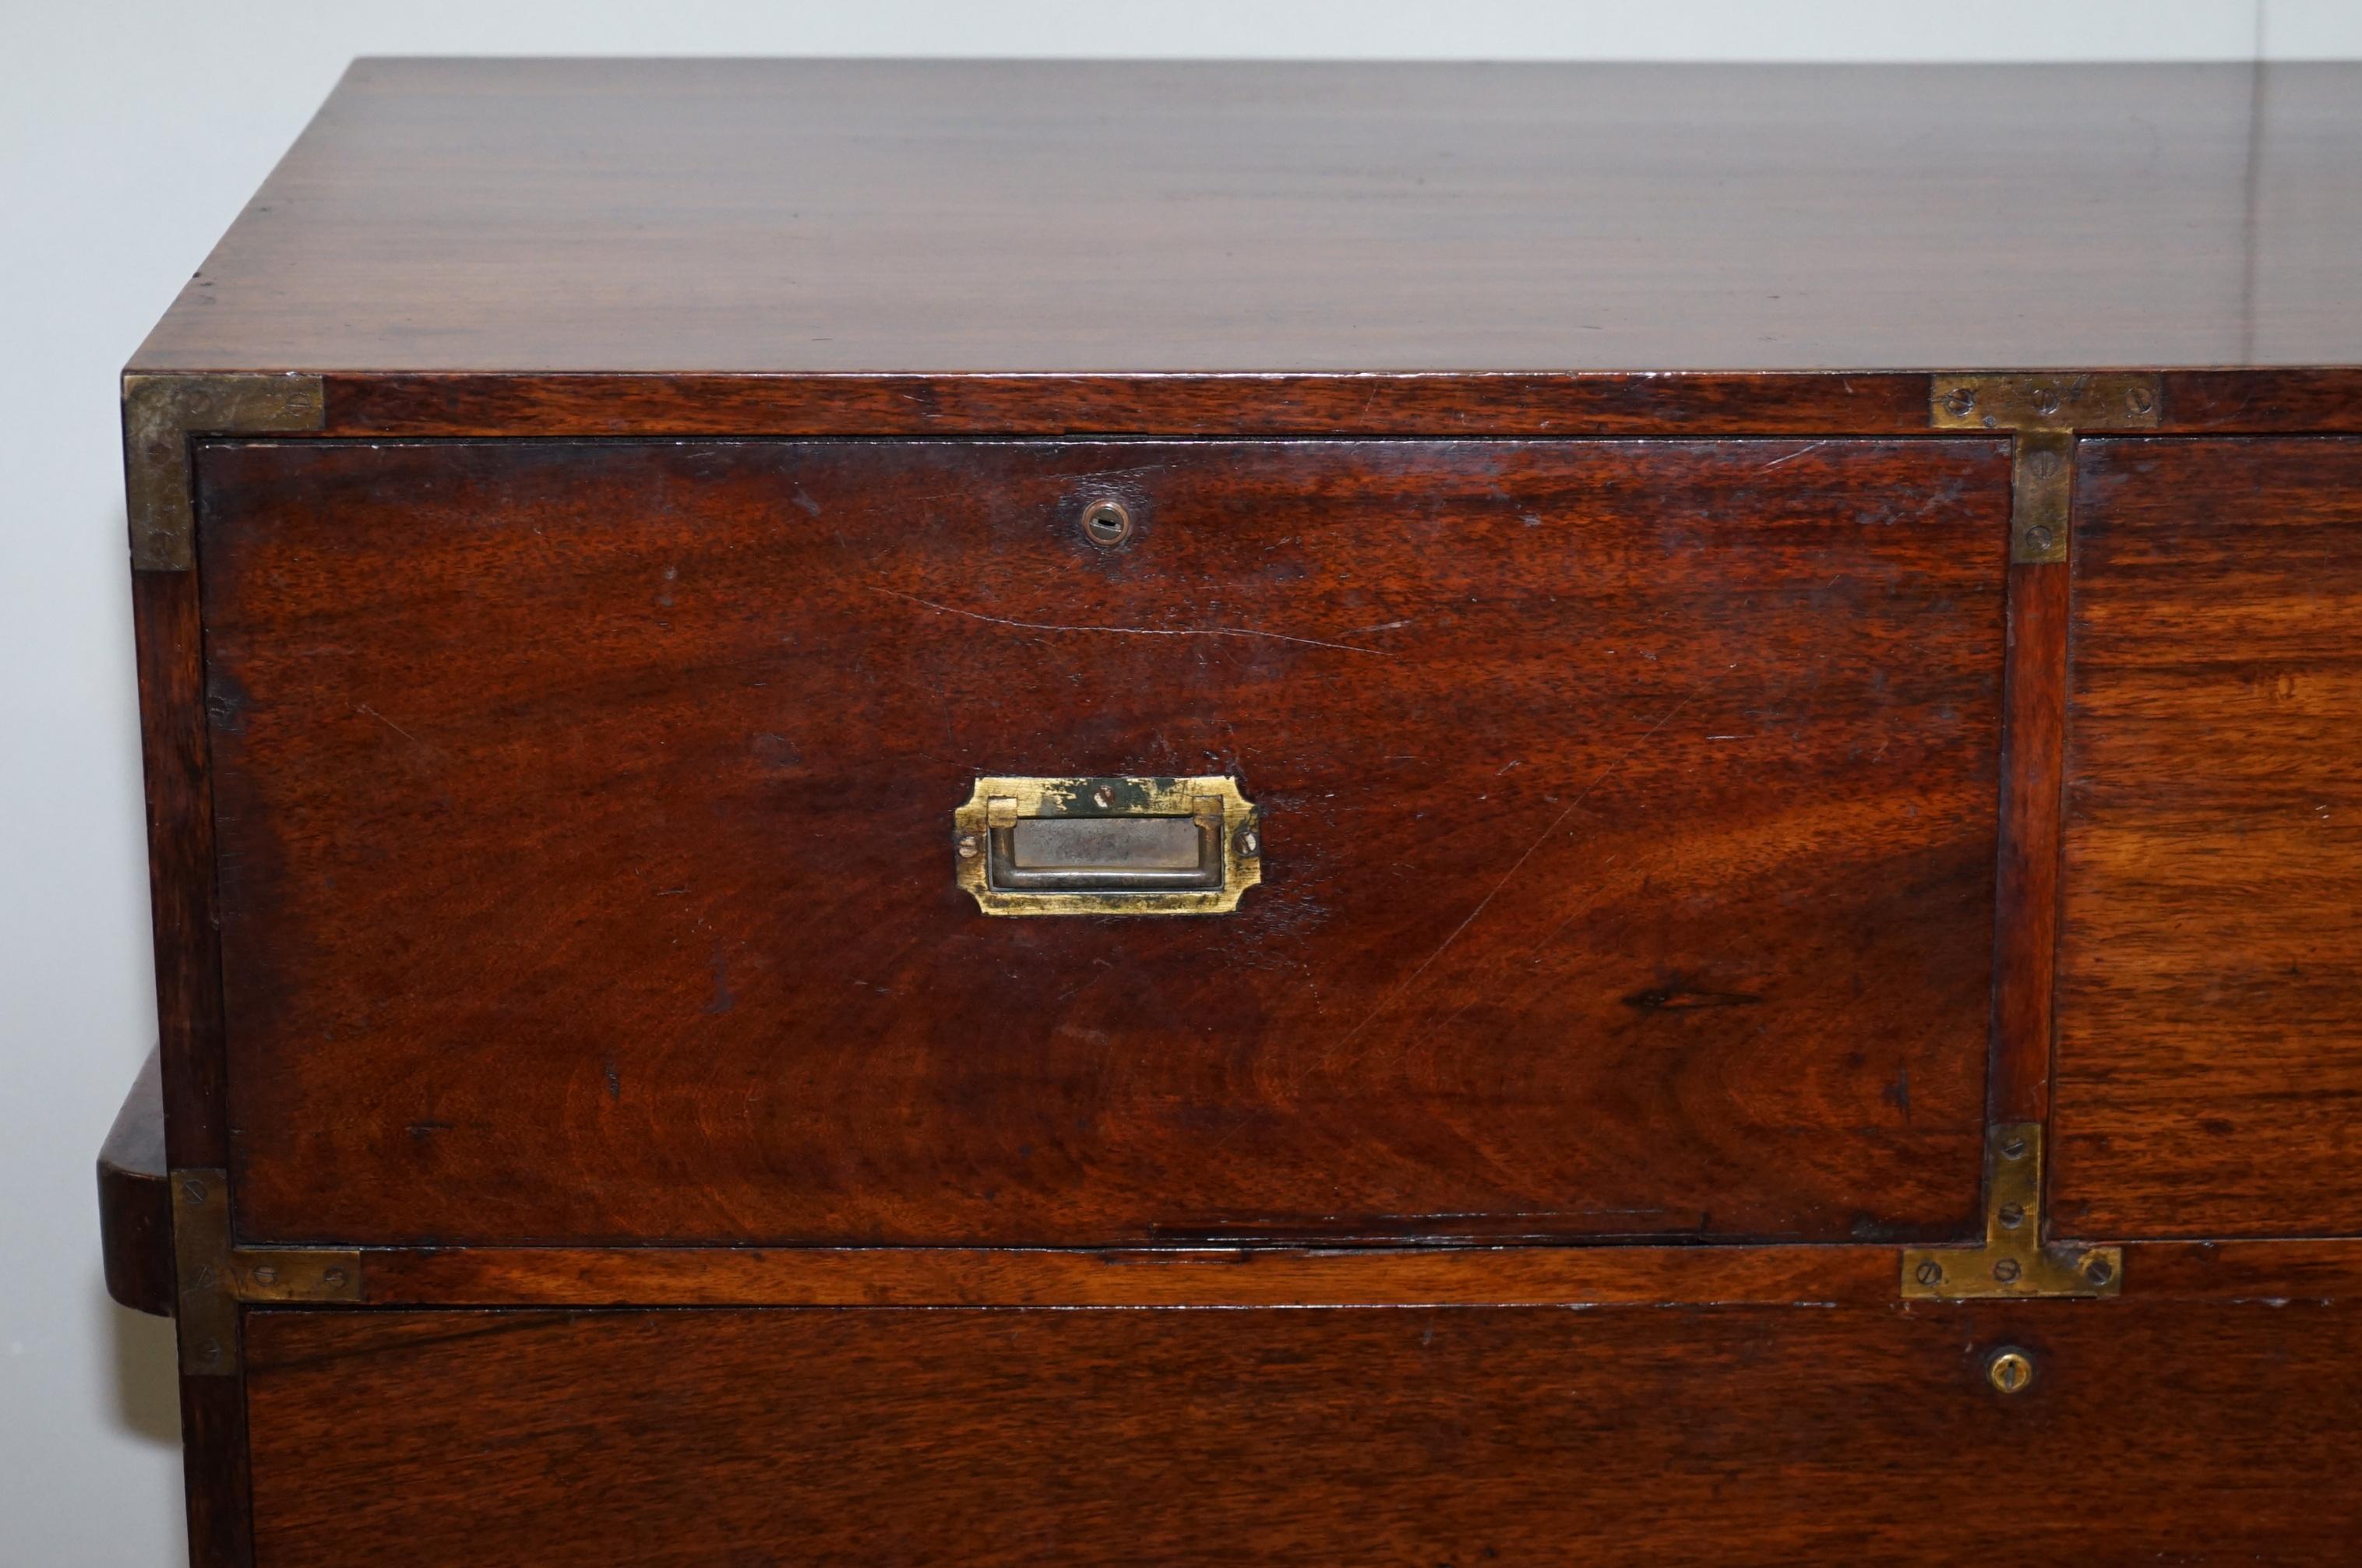 British Restored 1876 Stamped Camphor Wood Military Campaign Chest of Drawers with Desk For Sale